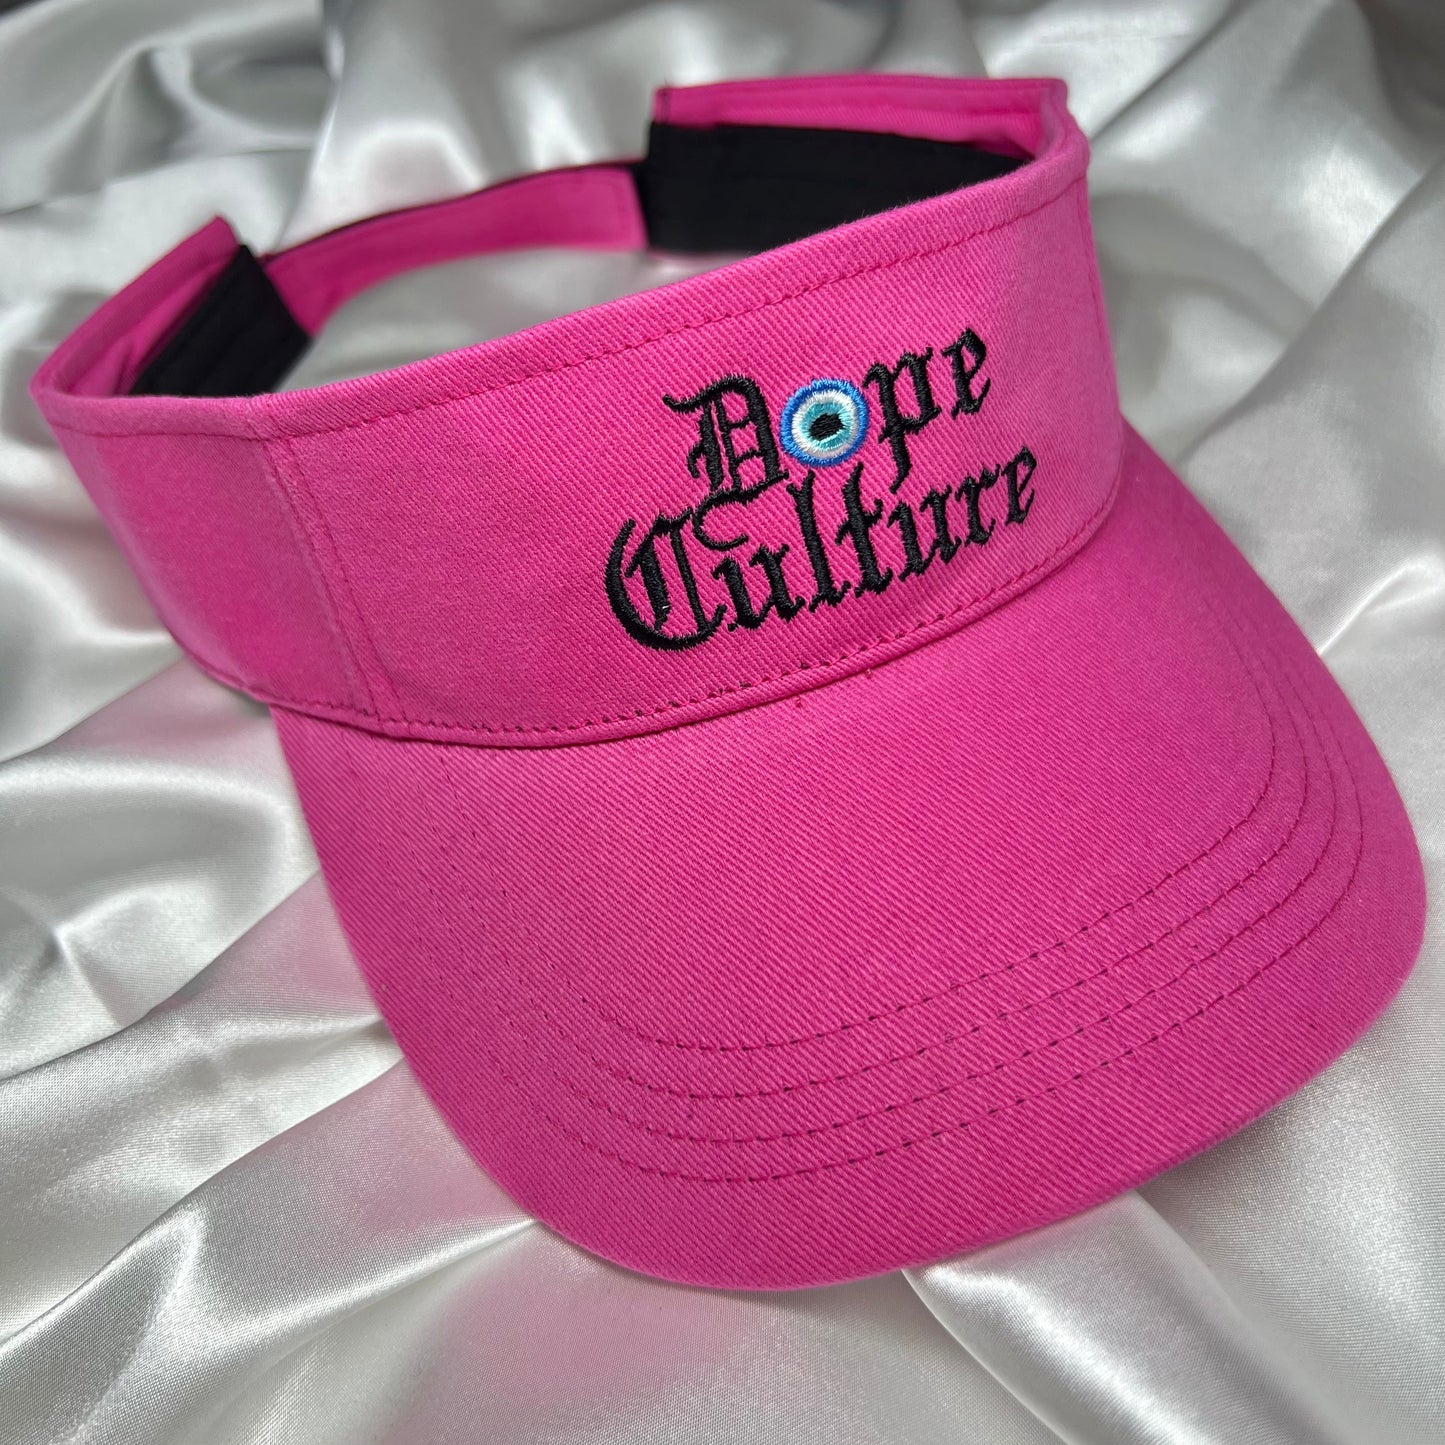 Protect The Culture Visor